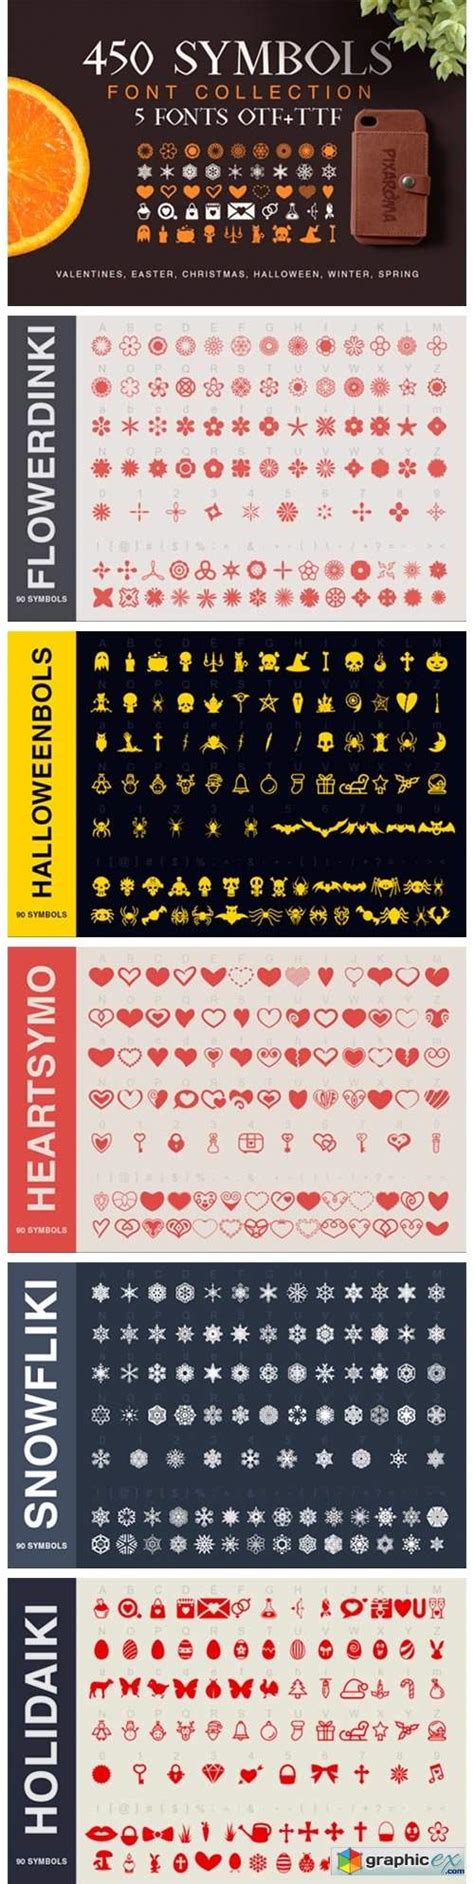 symbols collection font   vector stock image photoshop icon